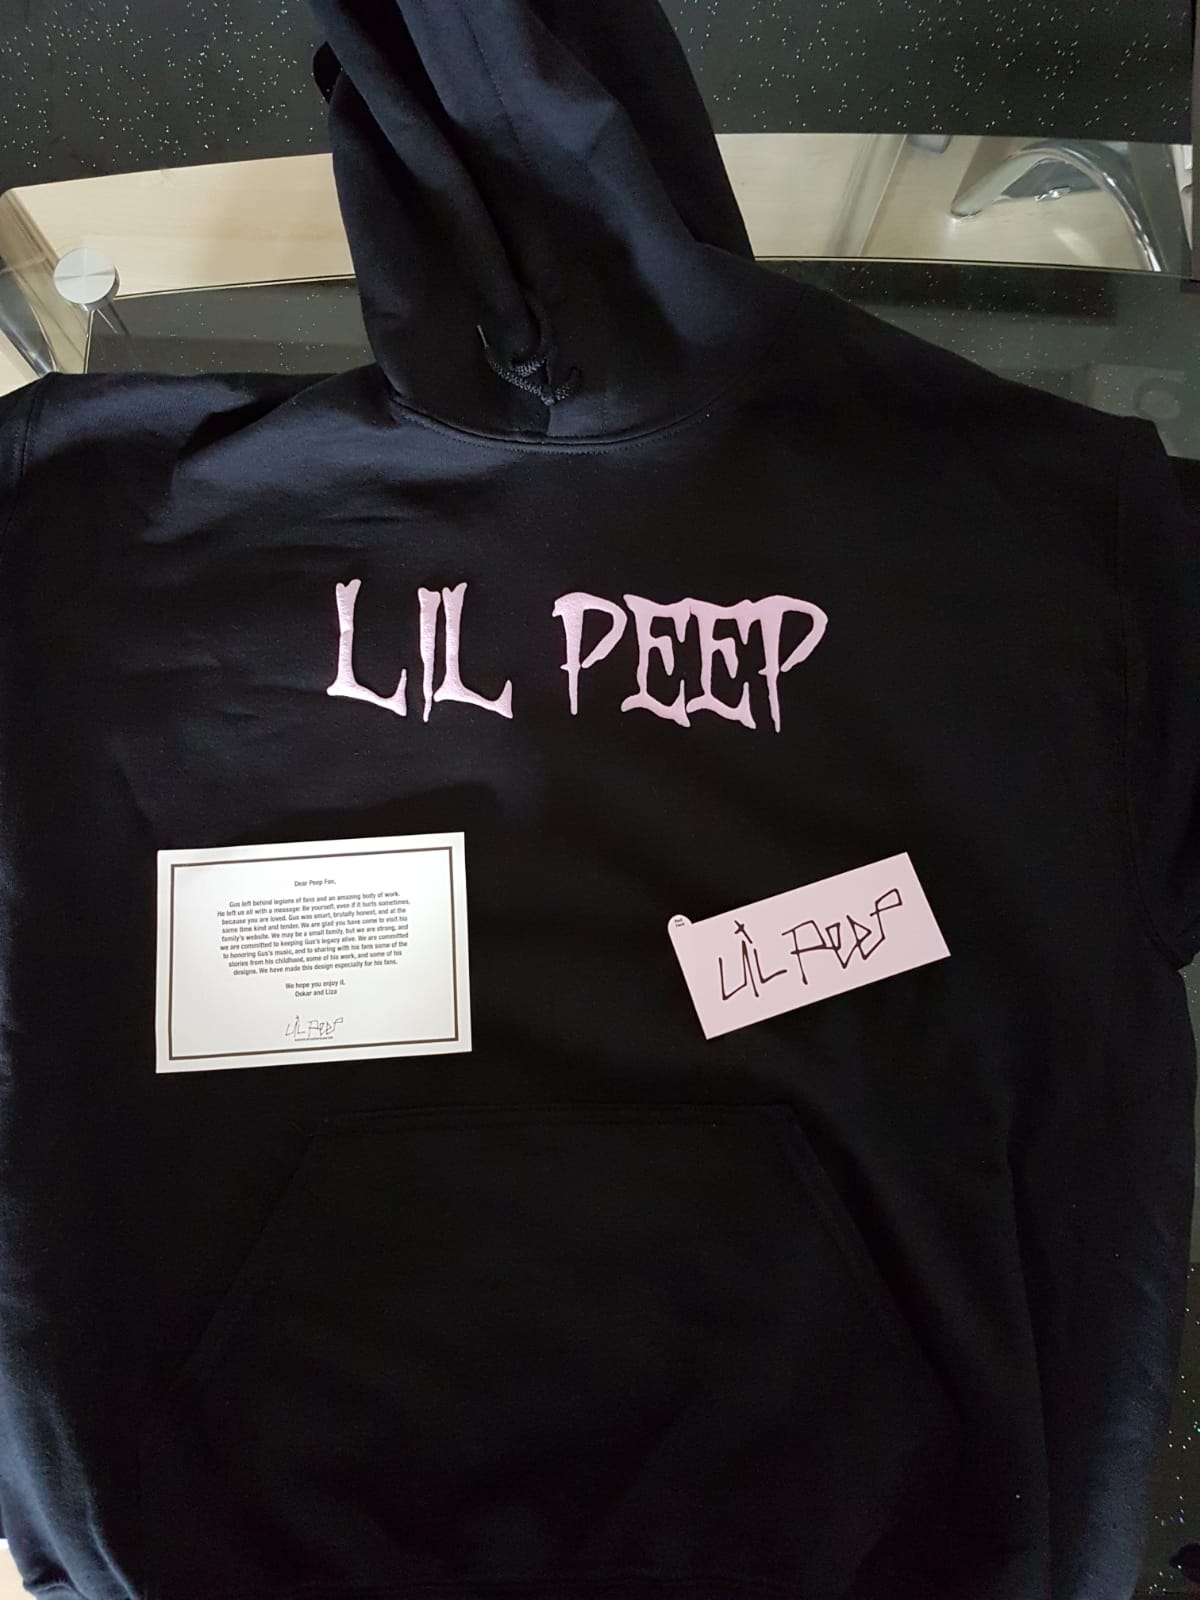 The largest Lie In Lil Peep Merch